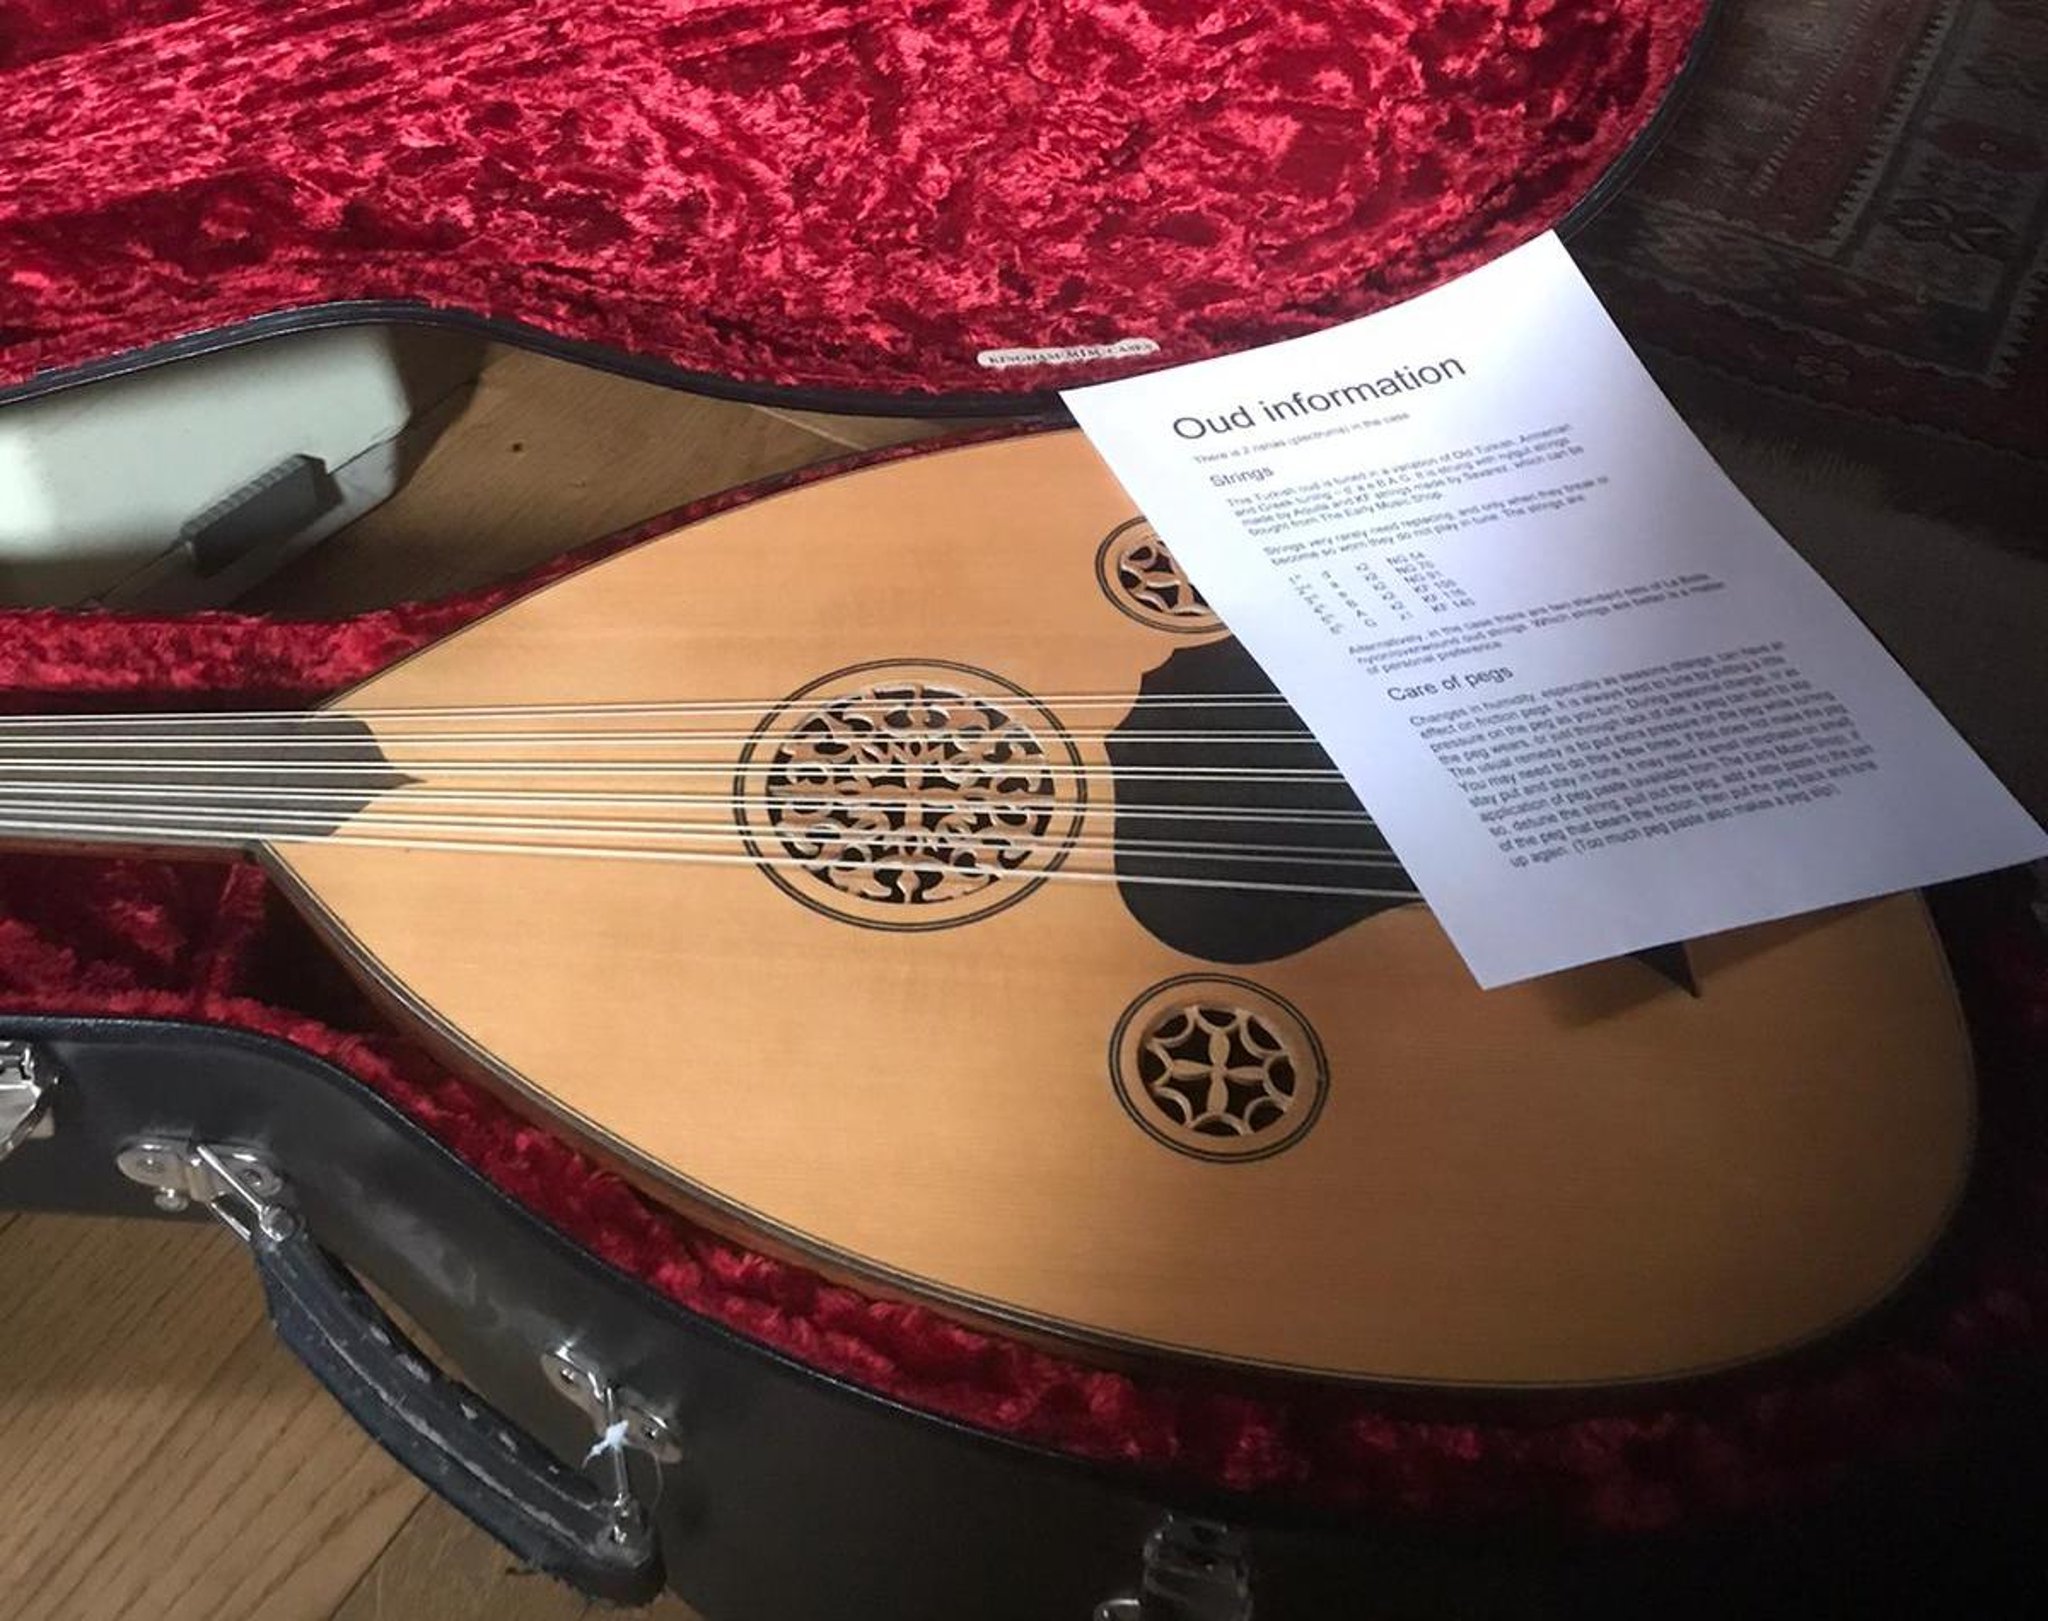 The heart-warming story of how Derbyshire people helped find a beautiful instrument for a refugee